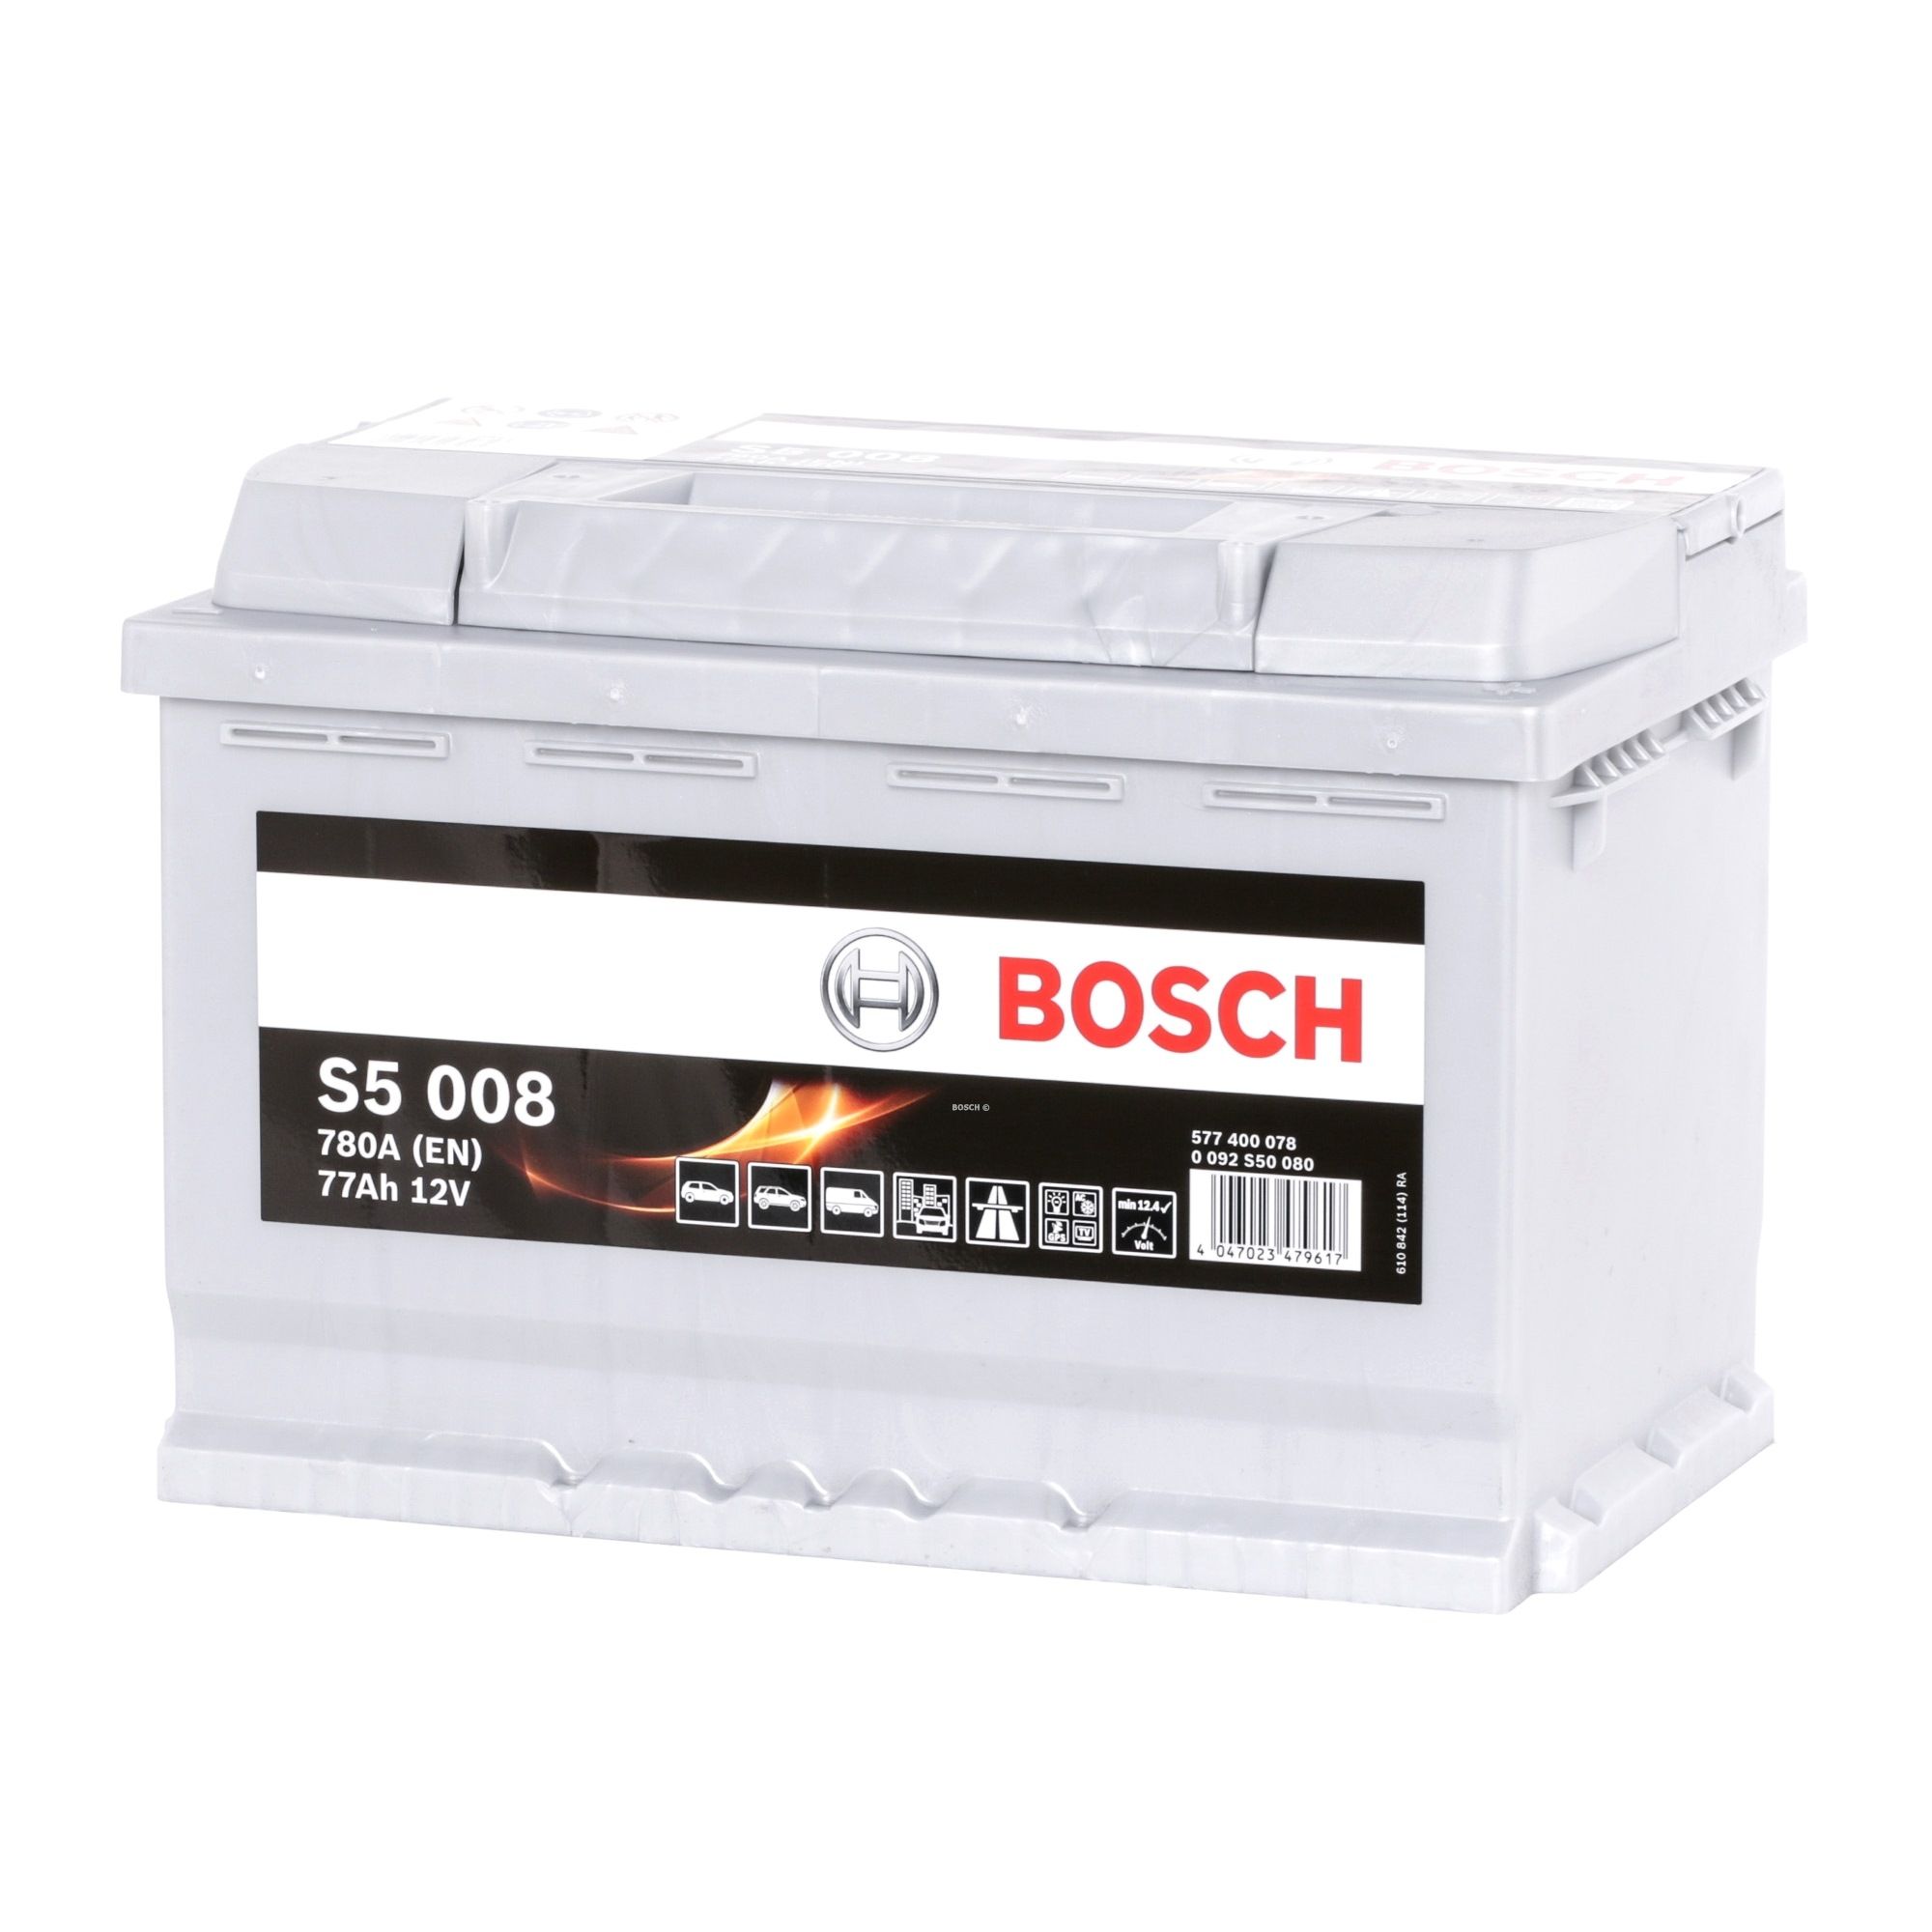 BOSCH S5 008 77ah 780A – Tomobile Store